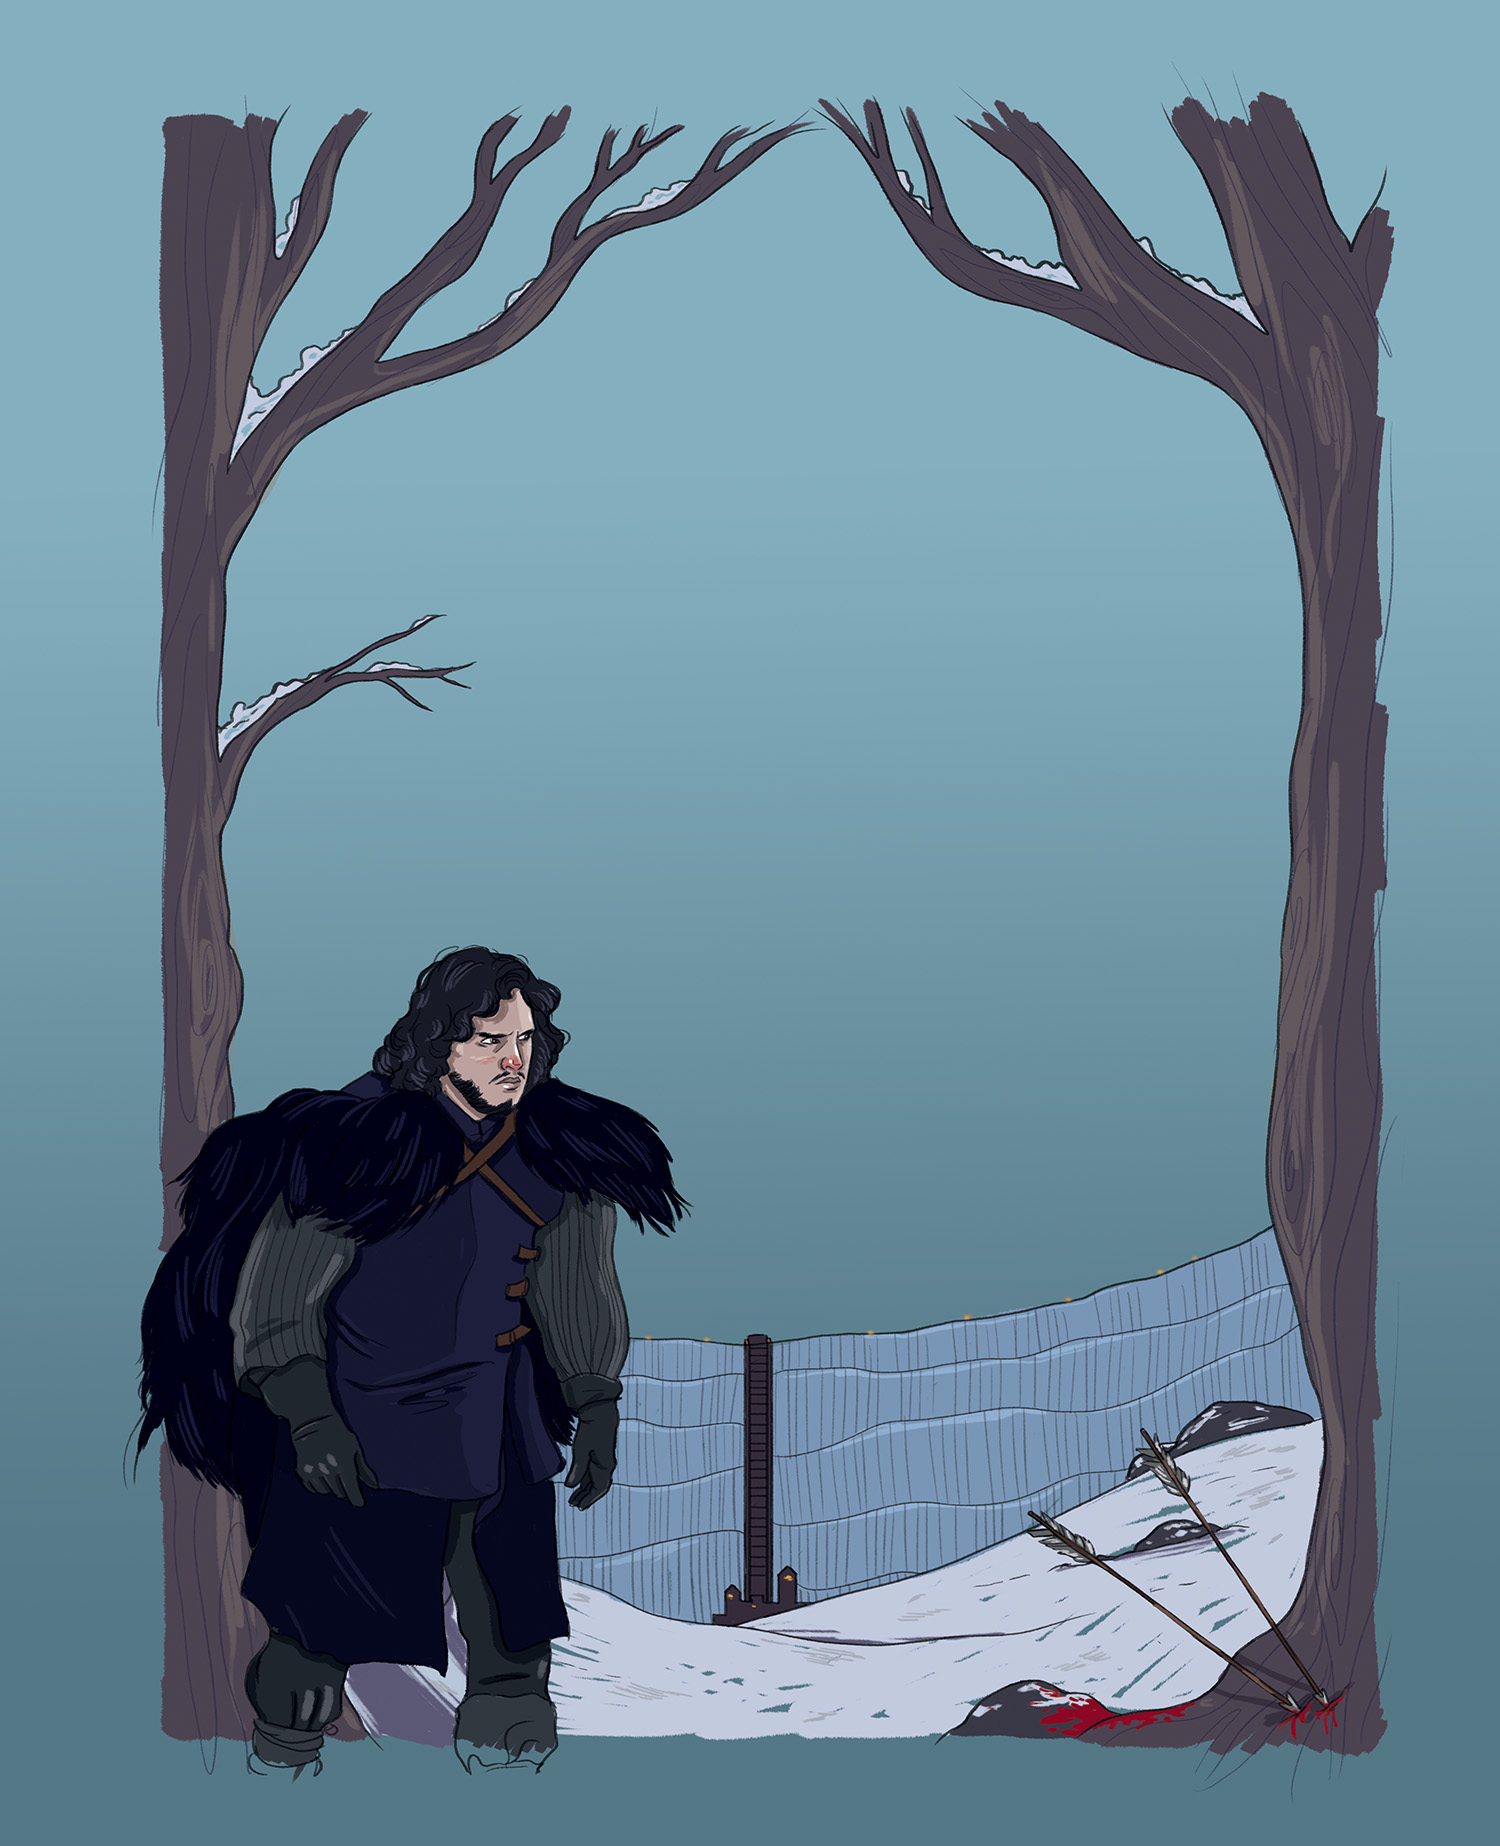  I actually had a column for a short time in the Capilano Courier, covering geek news. This was a full-page illustration that featured Jon Snow from Game of Thrones. 